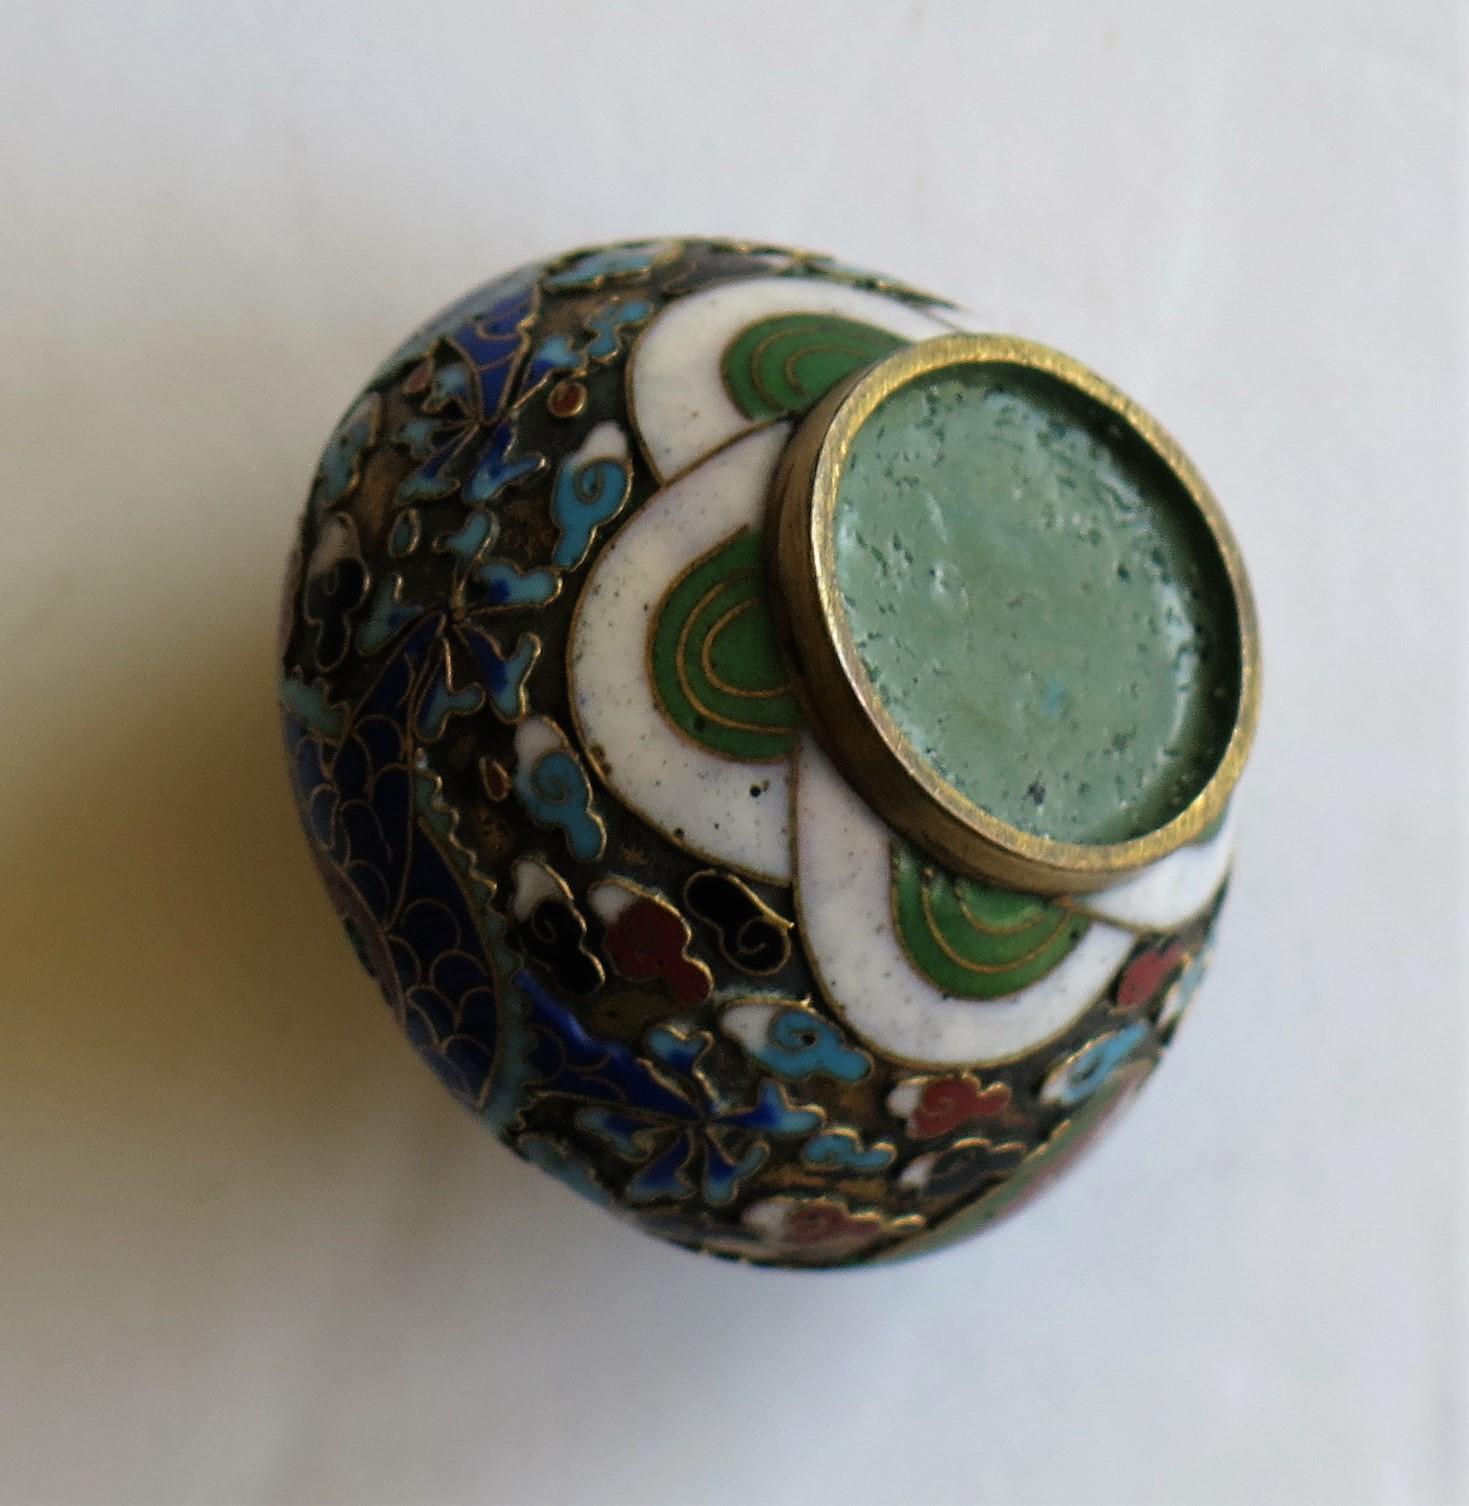 19th Century Chinese Cloisonné Pepper Pot with Dragon Decoration, Qing Dynasty 13